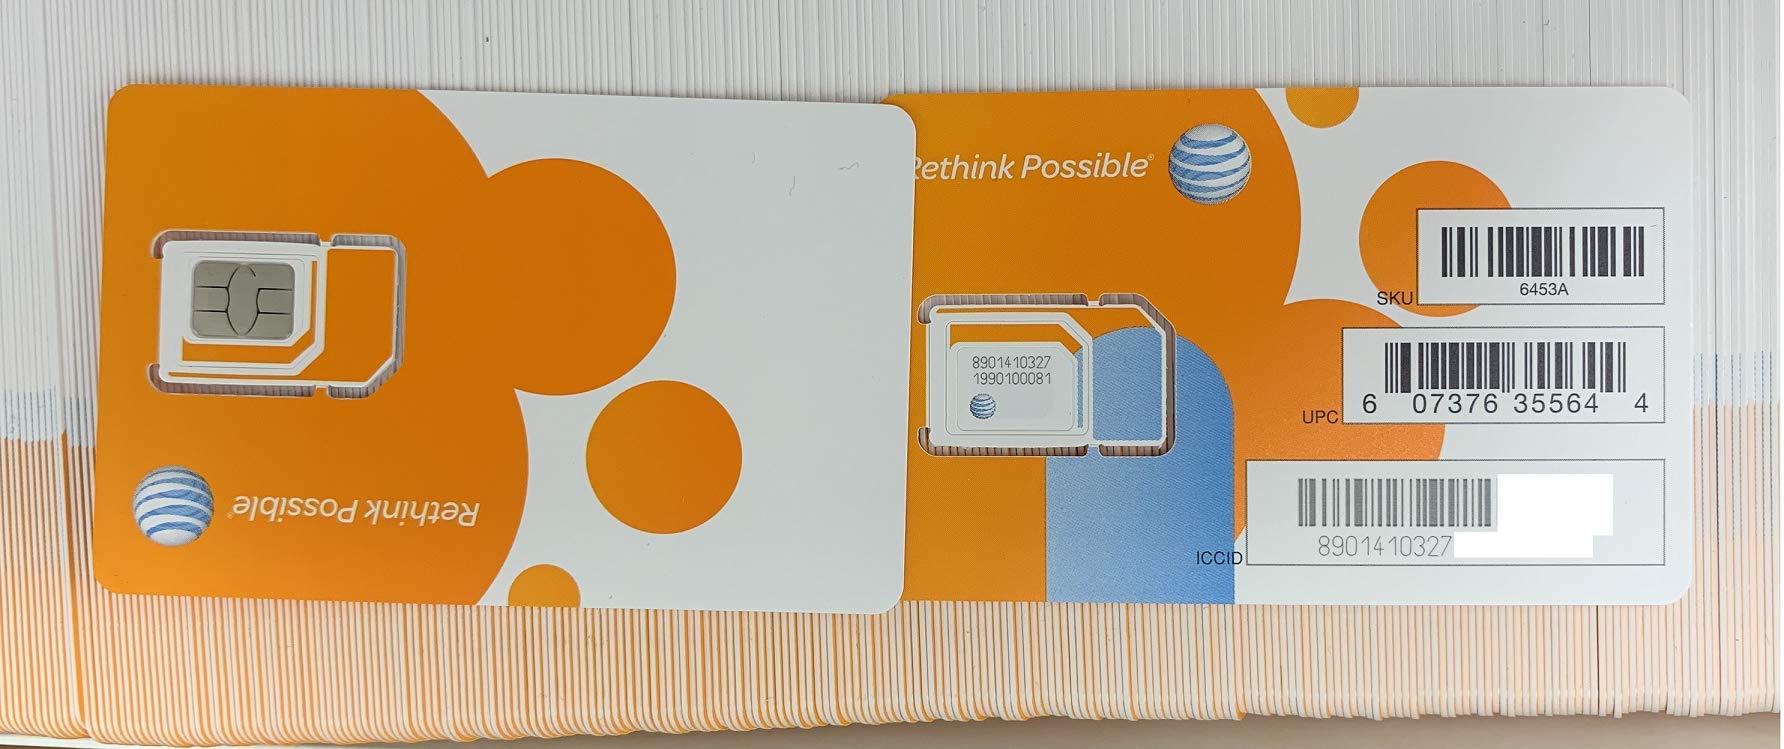 Obtaining A New SIM Card From AT&T – Necessary Steps